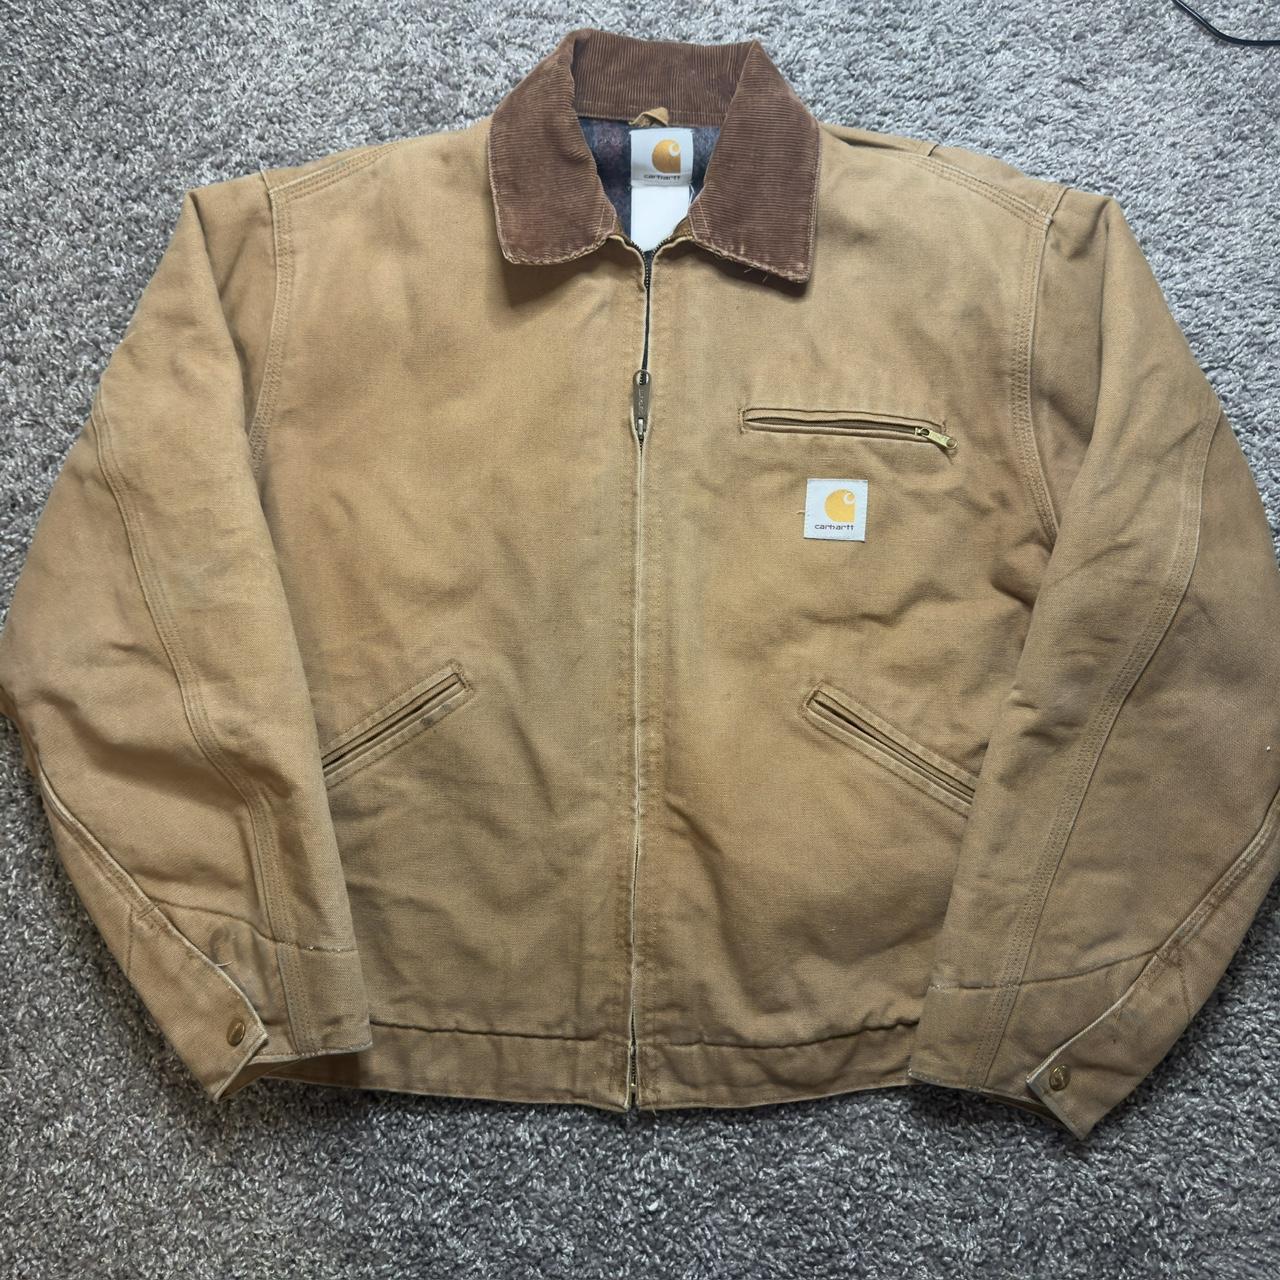 ANOTHER CARHARTT DROP! New carhartt and more to... - Depop